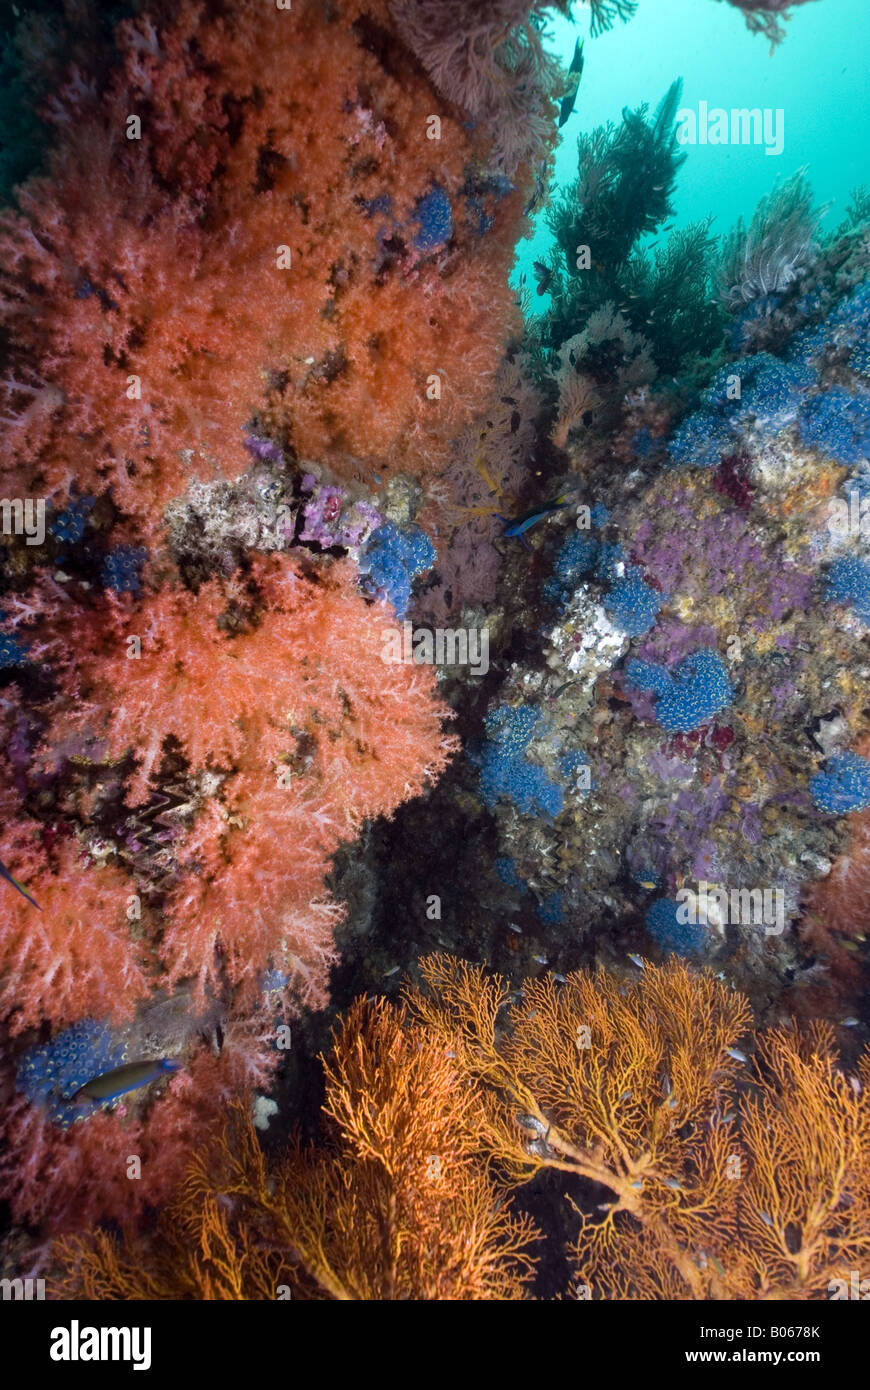 Coral Wall covered in hard and soft corals with gorgonians and blue tunicates under water Stock Photo